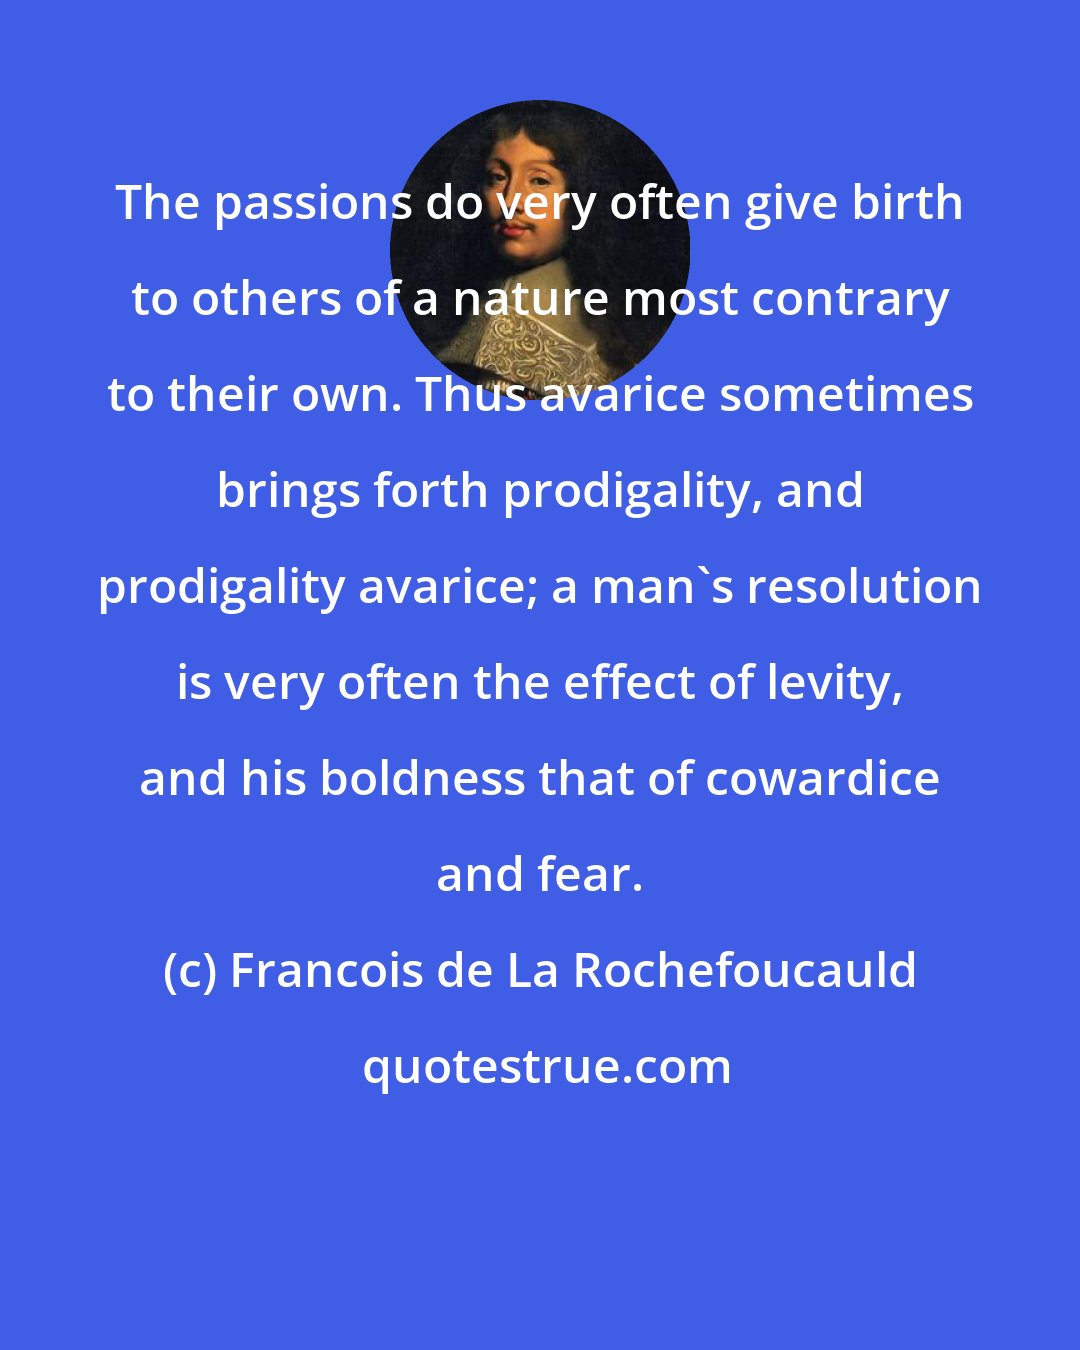 Francois de La Rochefoucauld: The passions do very often give birth to others of a nature most contrary to their own. Thus avarice sometimes brings forth prodigality, and prodigality avarice; a man's resolution is very often the effect of levity, and his boldness that of cowardice and fear.